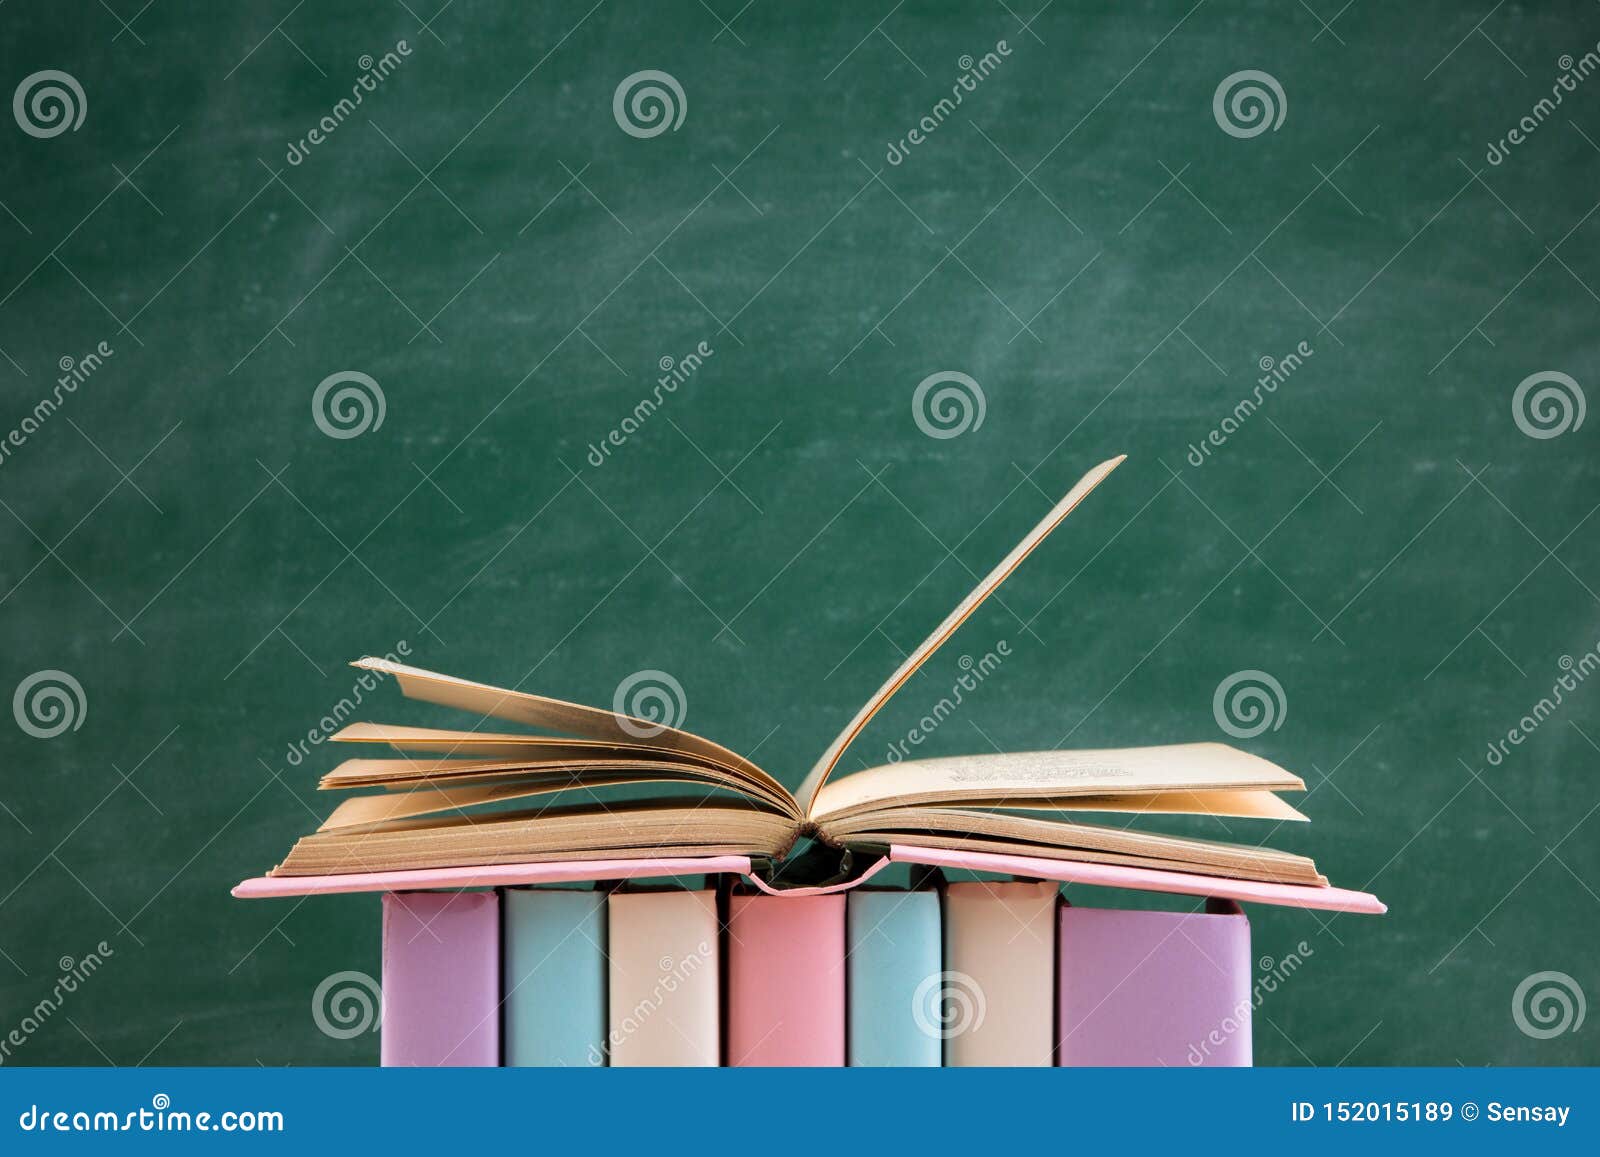 Education and Reading Concept - Group of Colorful Books on the Wooden Table  in the Classroom, Blackboard Background Stock Image - Image of university,  chalk: 152015189